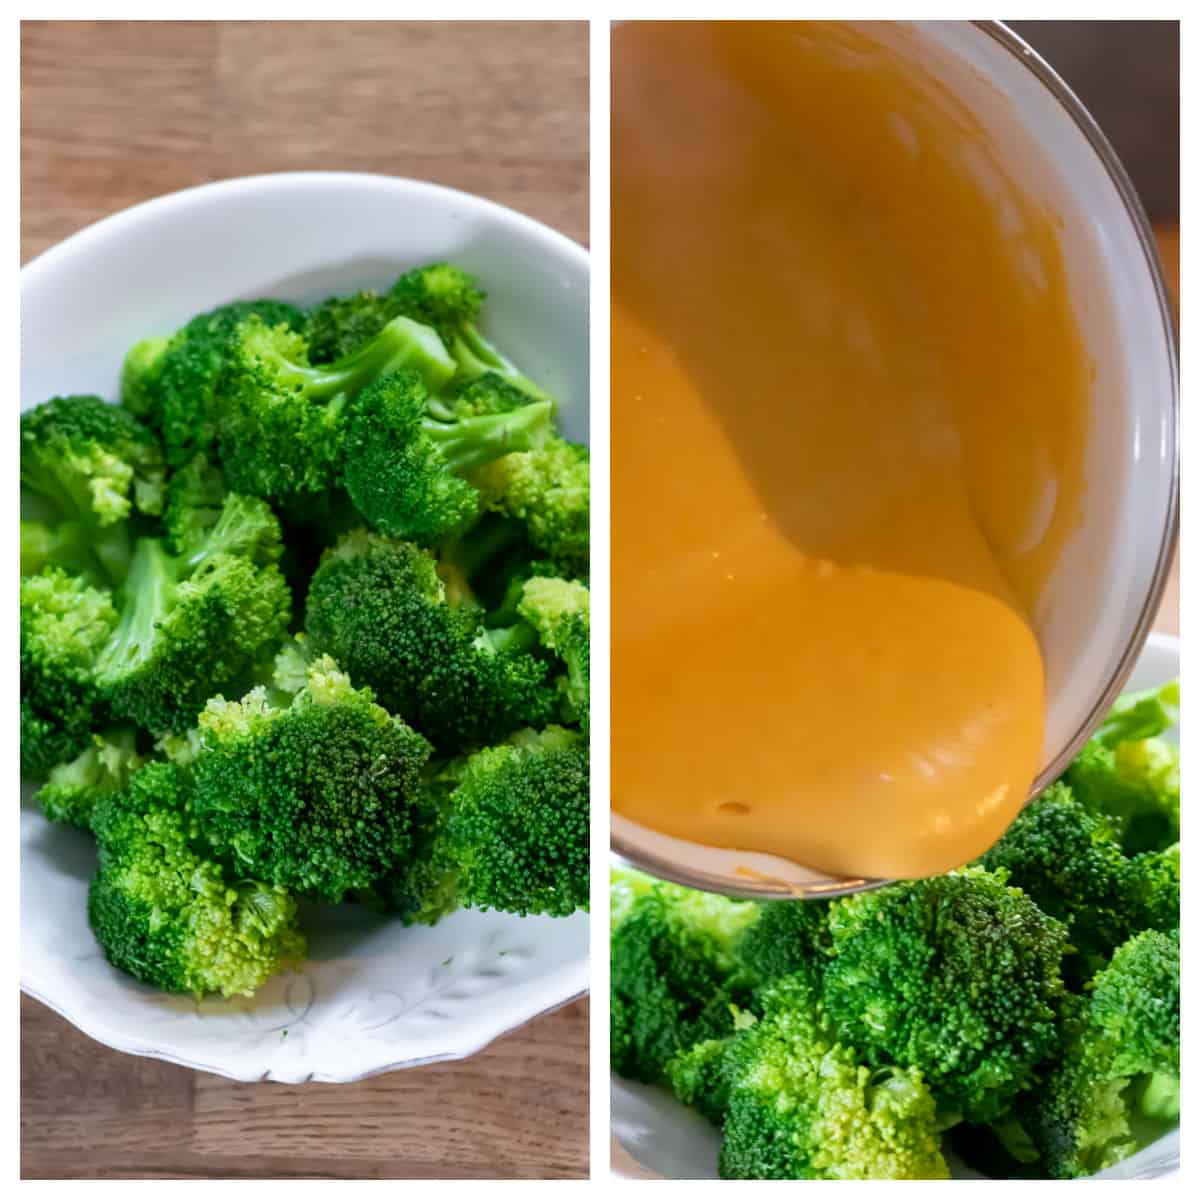 Pouring cheese sauce onto steamed broccoli.